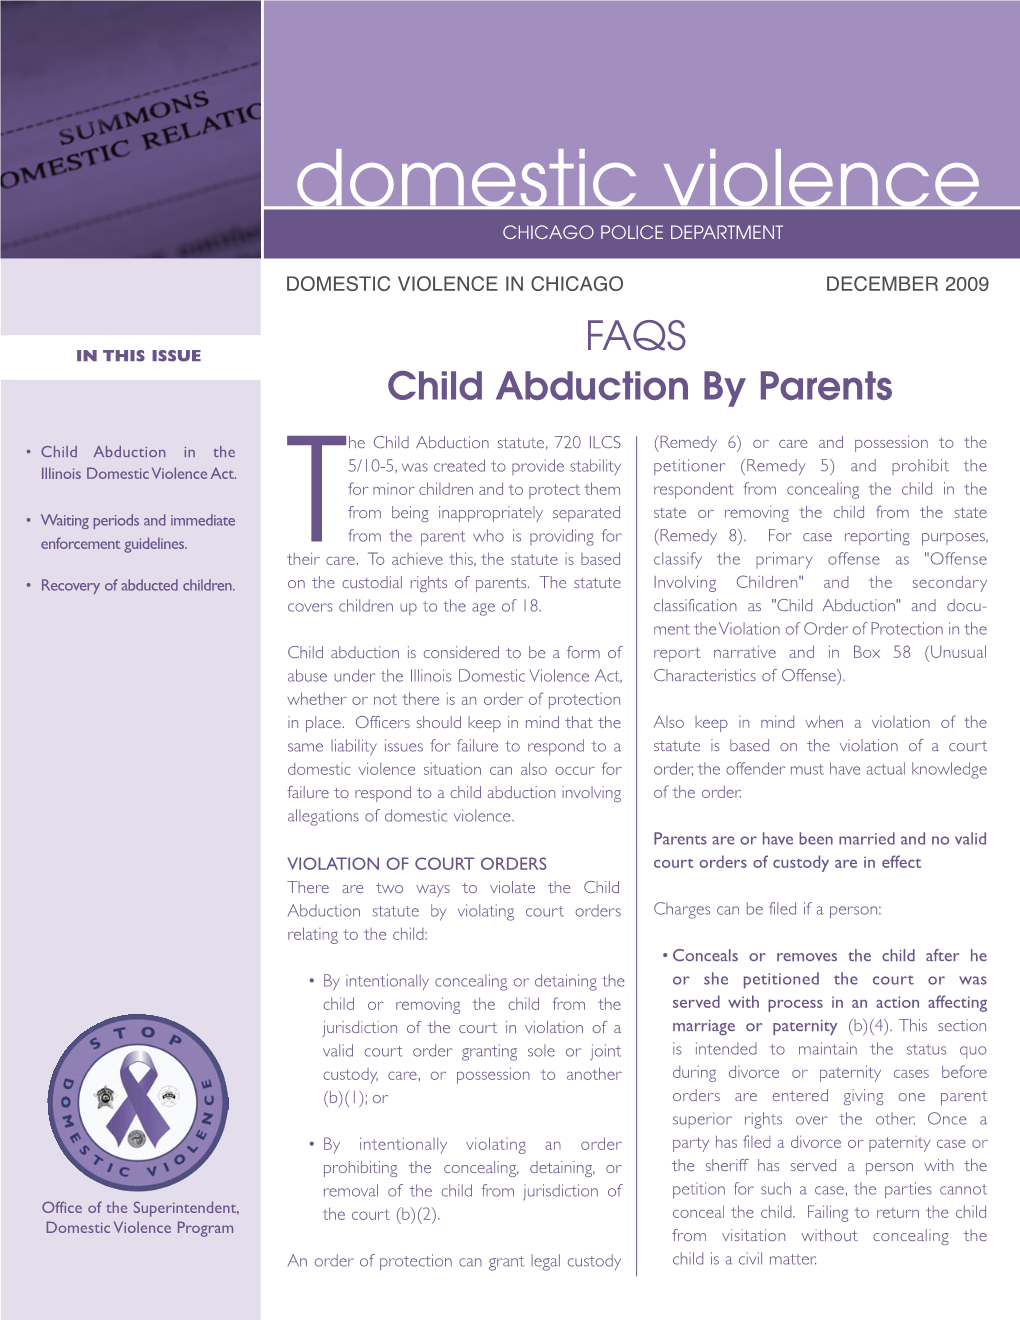 Faqs – Child Abduction by Parents (December 2009)